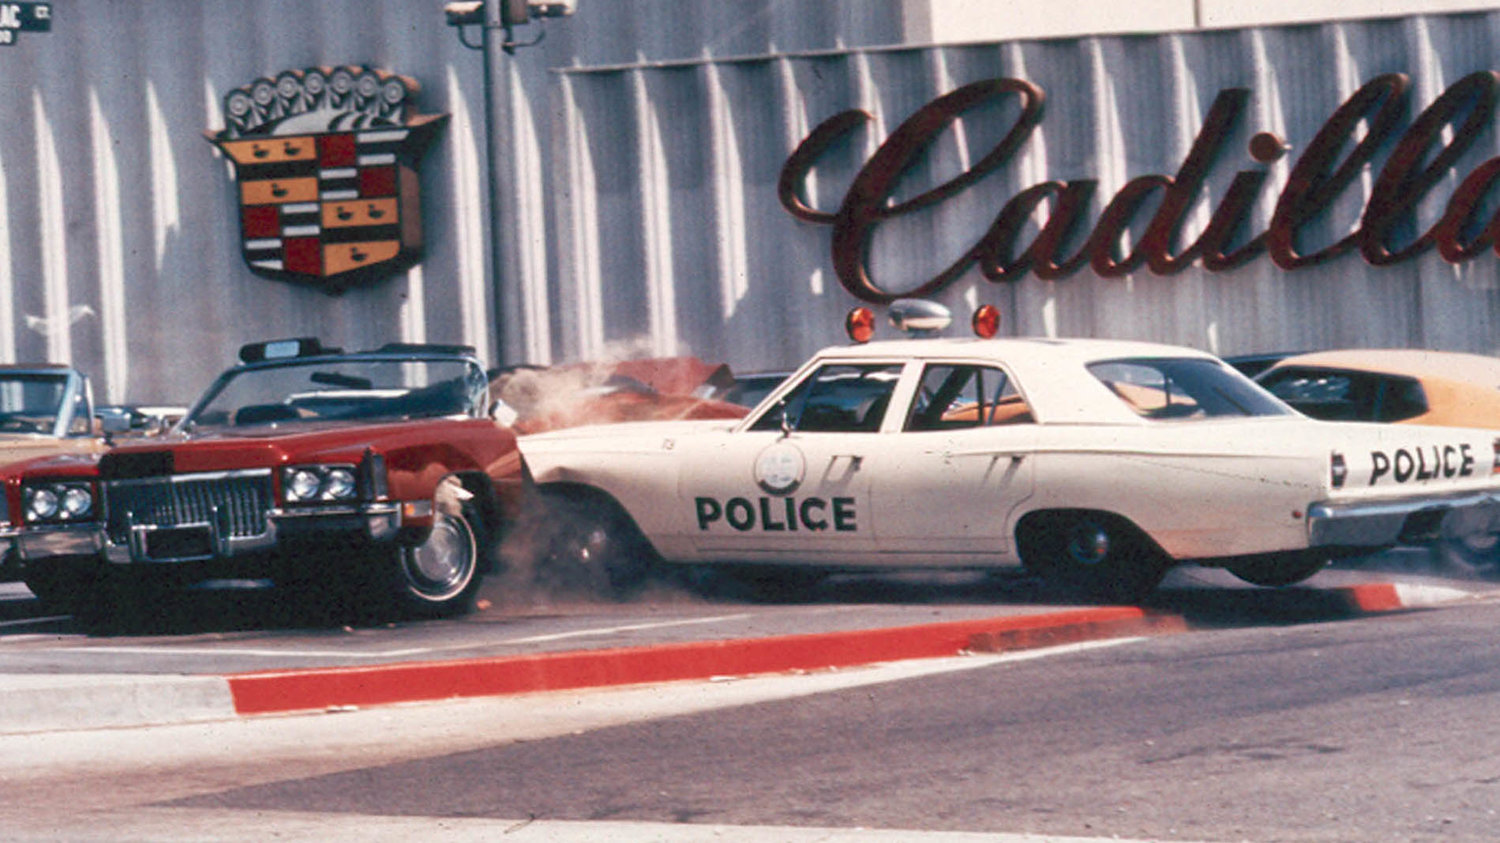 Images from the filming of the 1974 cult classic “Gone in 60 Seconds” were provided to The Chronicle by producer Michael Leone.